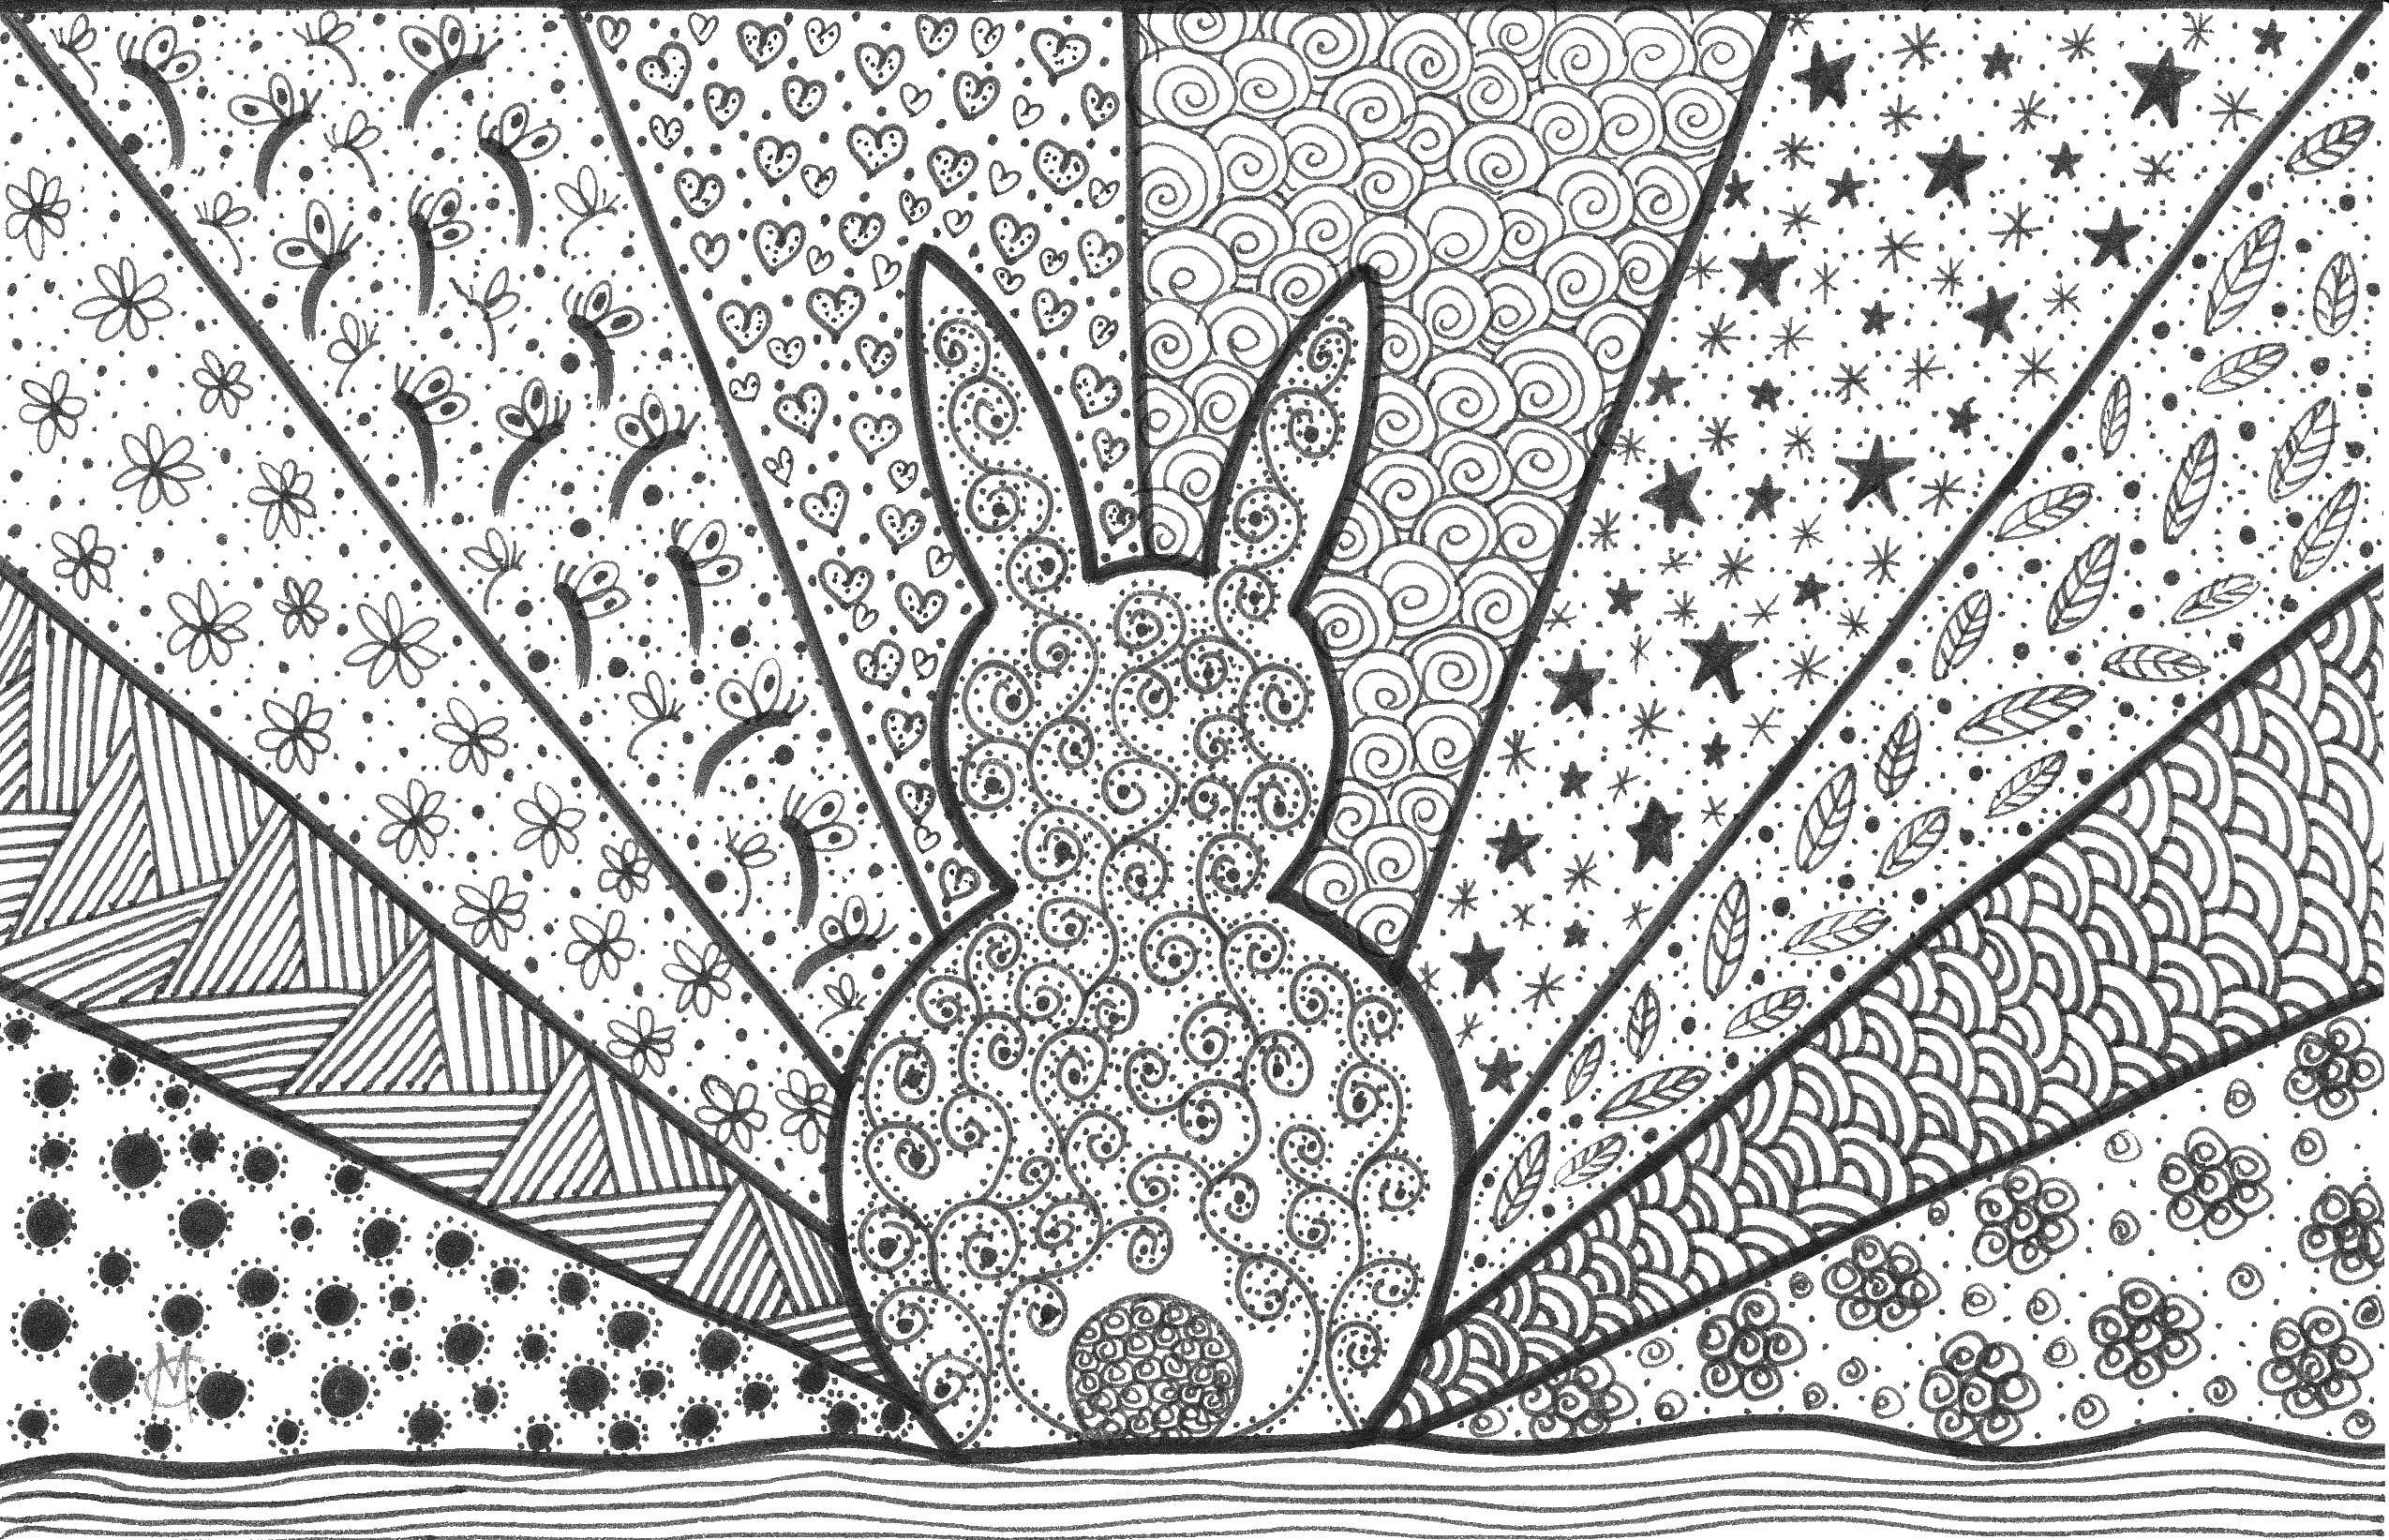 Coloring Patterns, Bunny. Category patterns. Tags:  patterns, shapes, stress relief, Bunny.